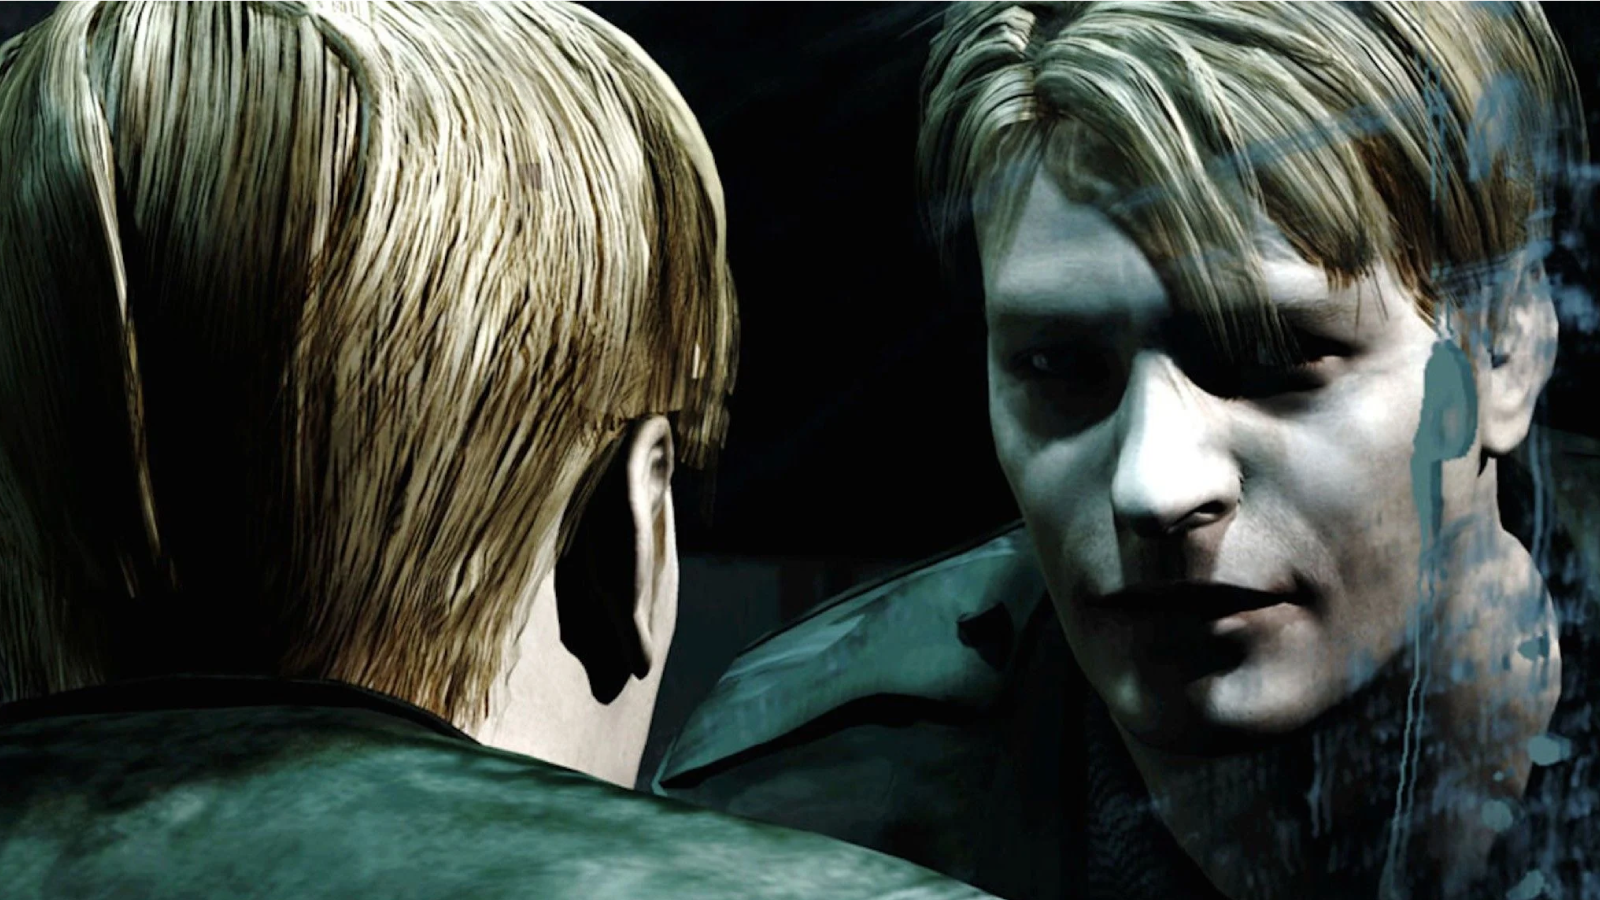 Silent Hill 2 is getting a remake courtesy of Bloober Team